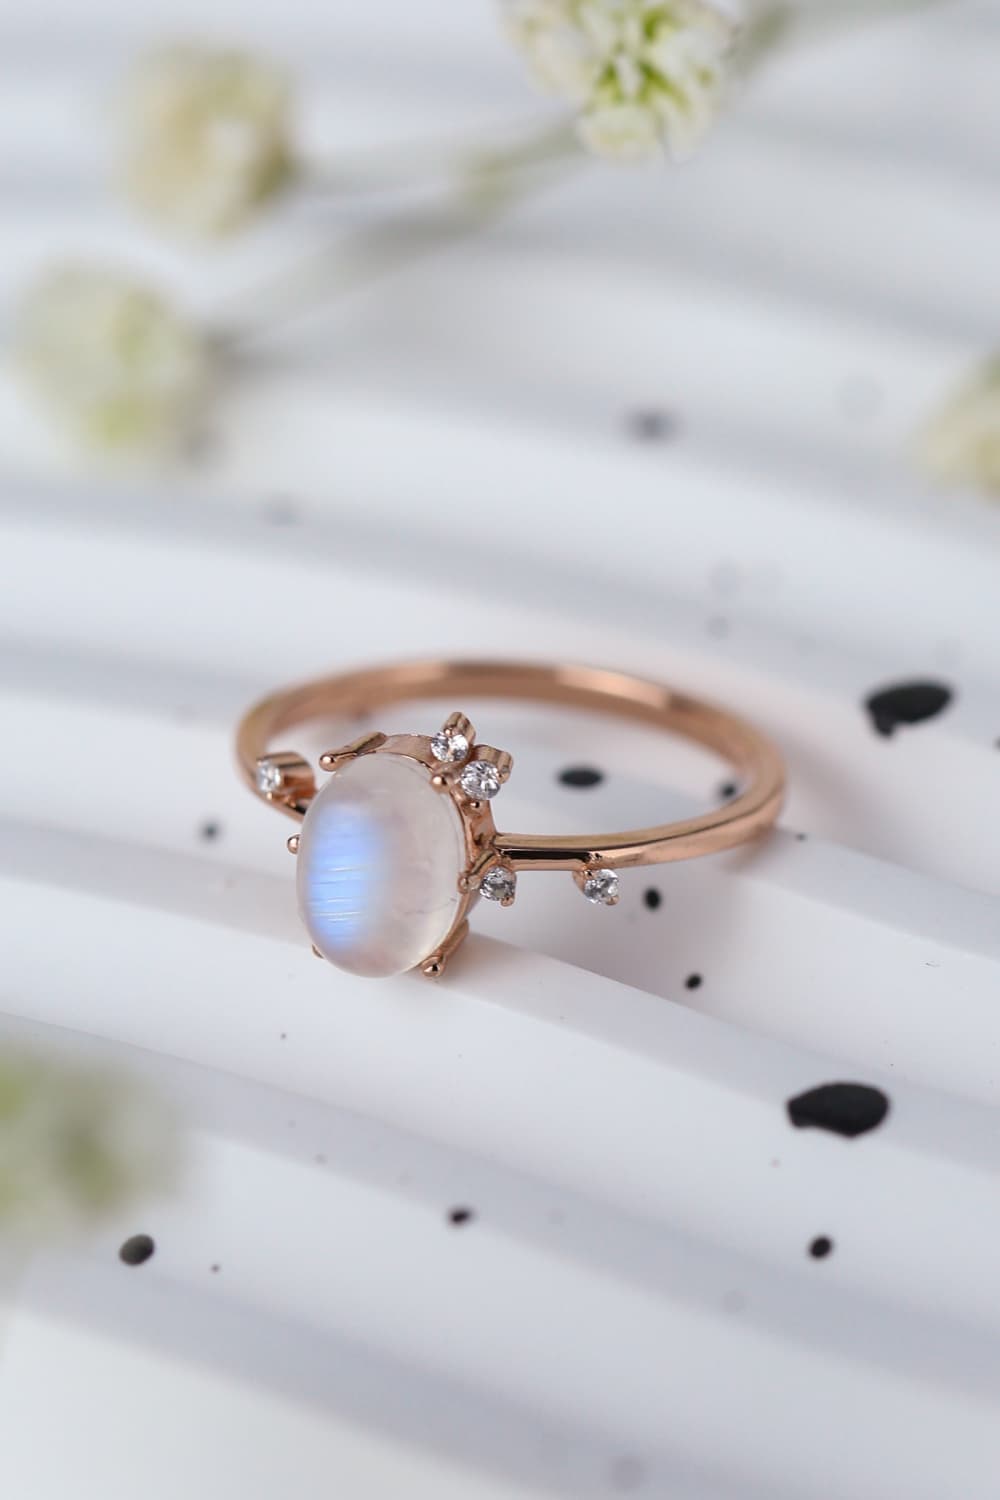 Light Gray High Quality Natural Moonstone 925 Sterling Silver Ring Sentient Beauty Fashions rings